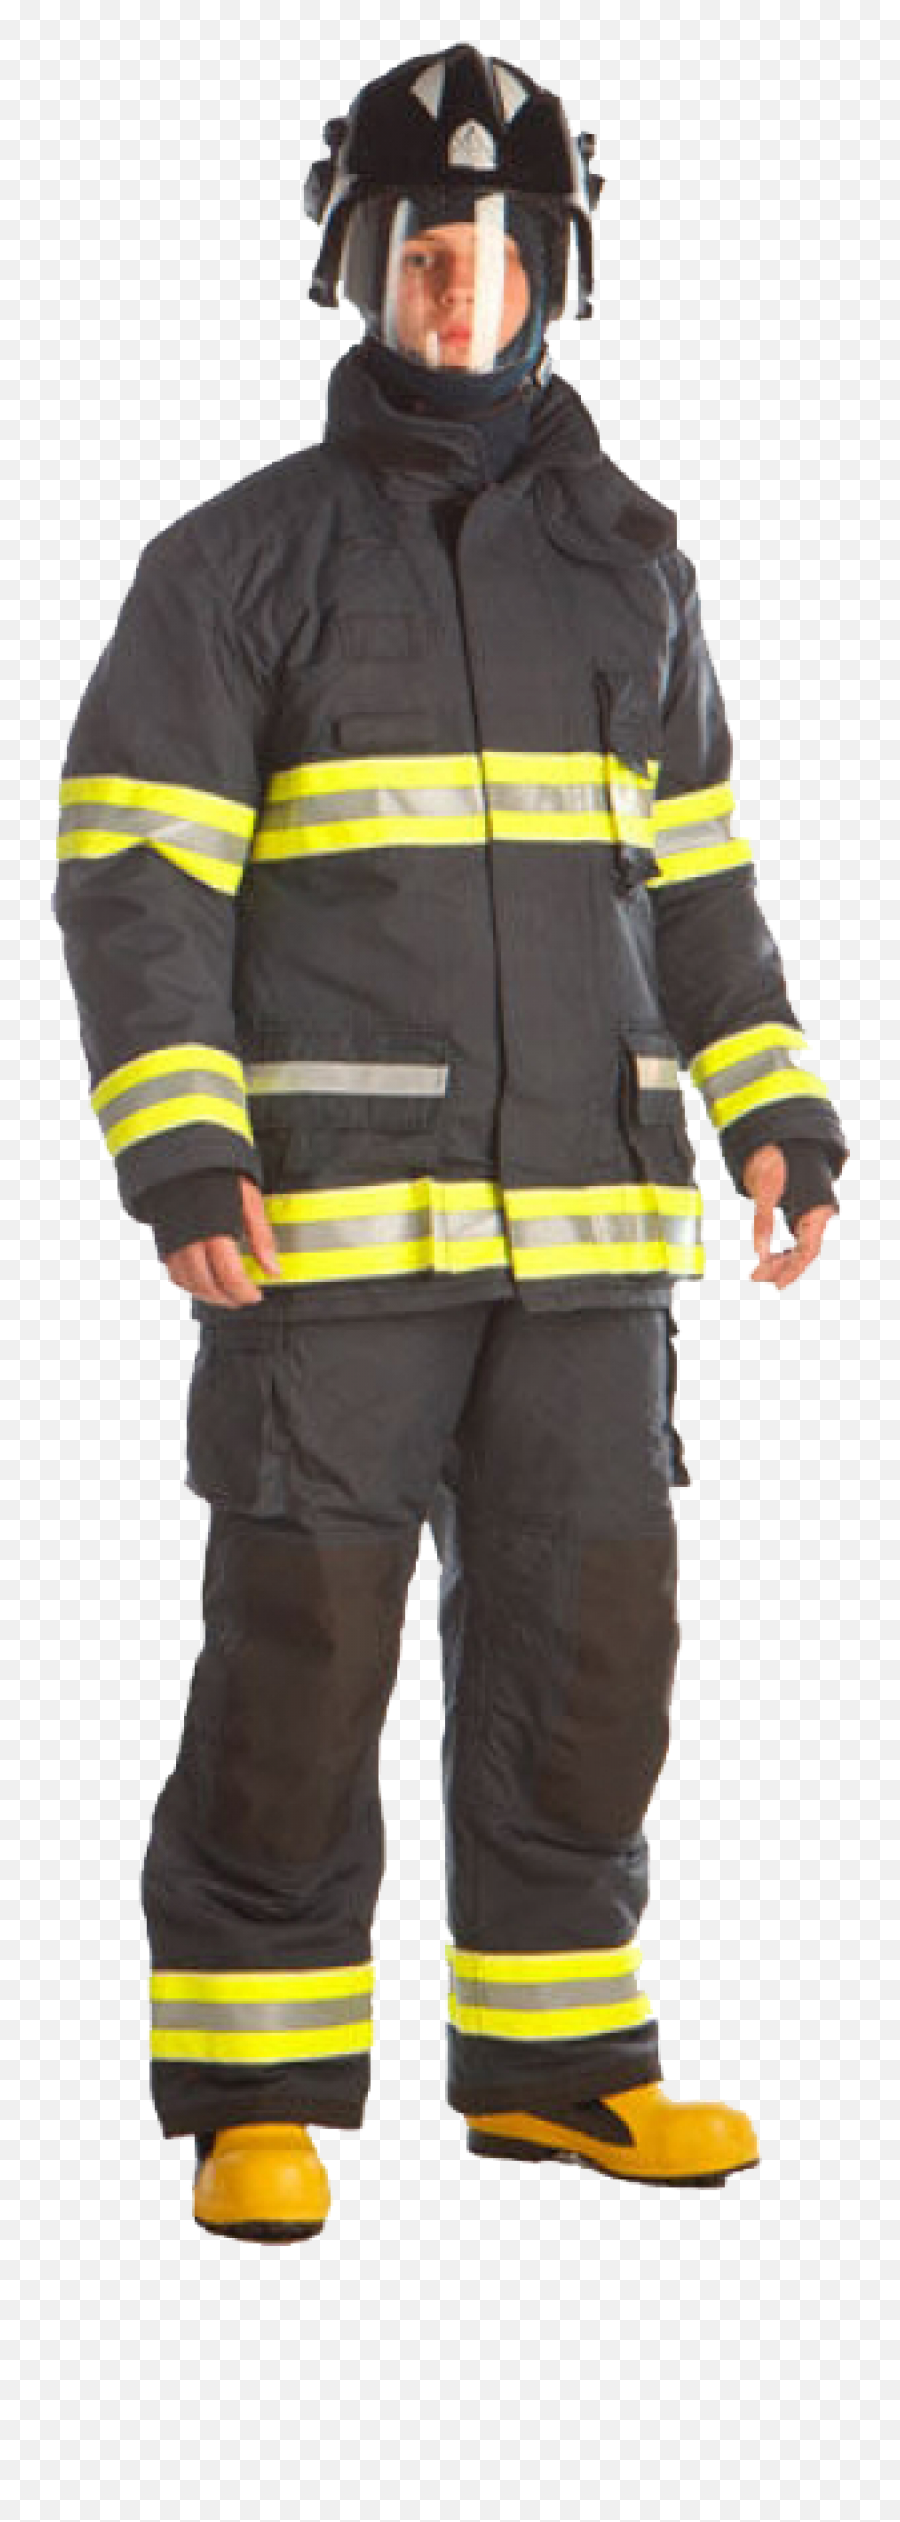 Firefighter Png Images Free Download - Fireman Png,Firefighter Png